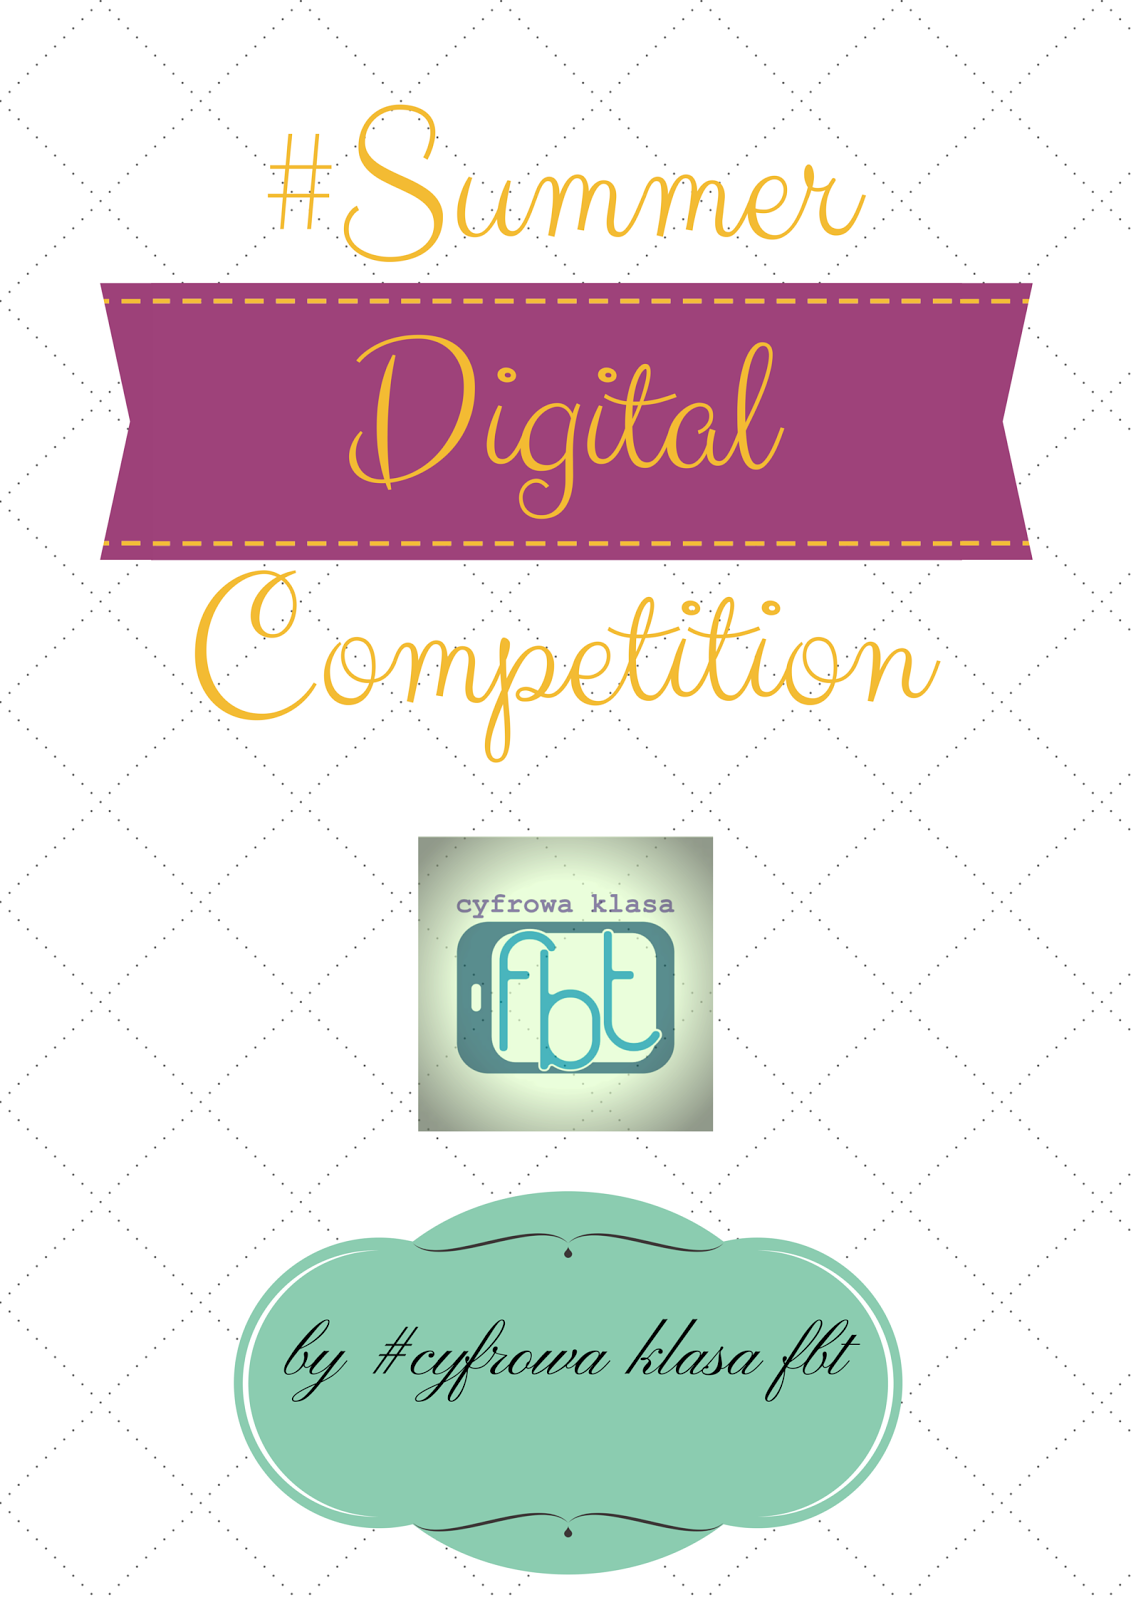 #Summer Digital Competition